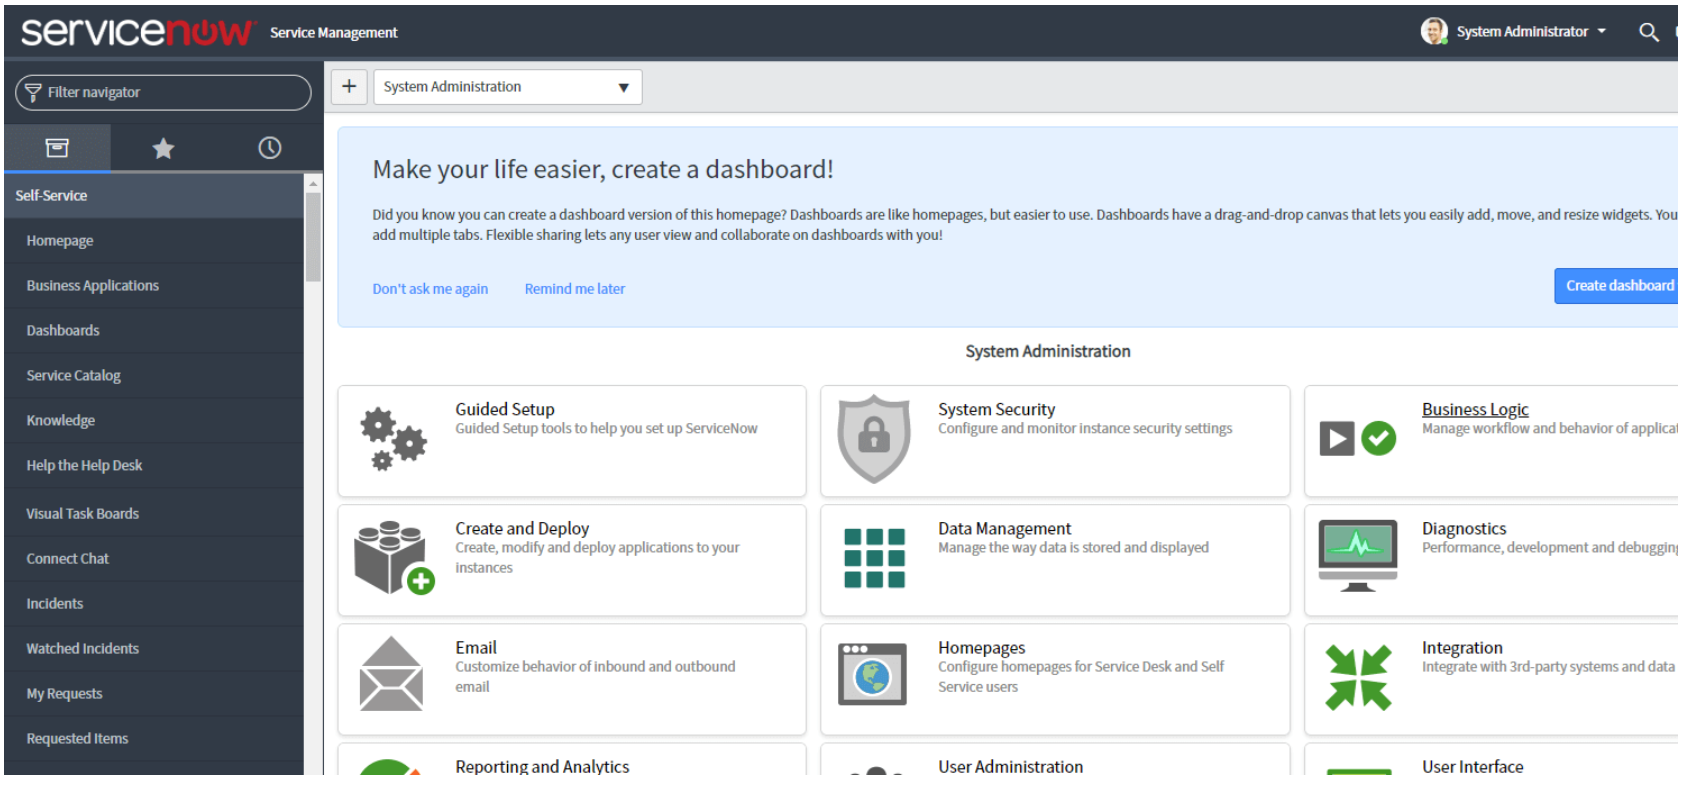 Access to servicenow dashboard